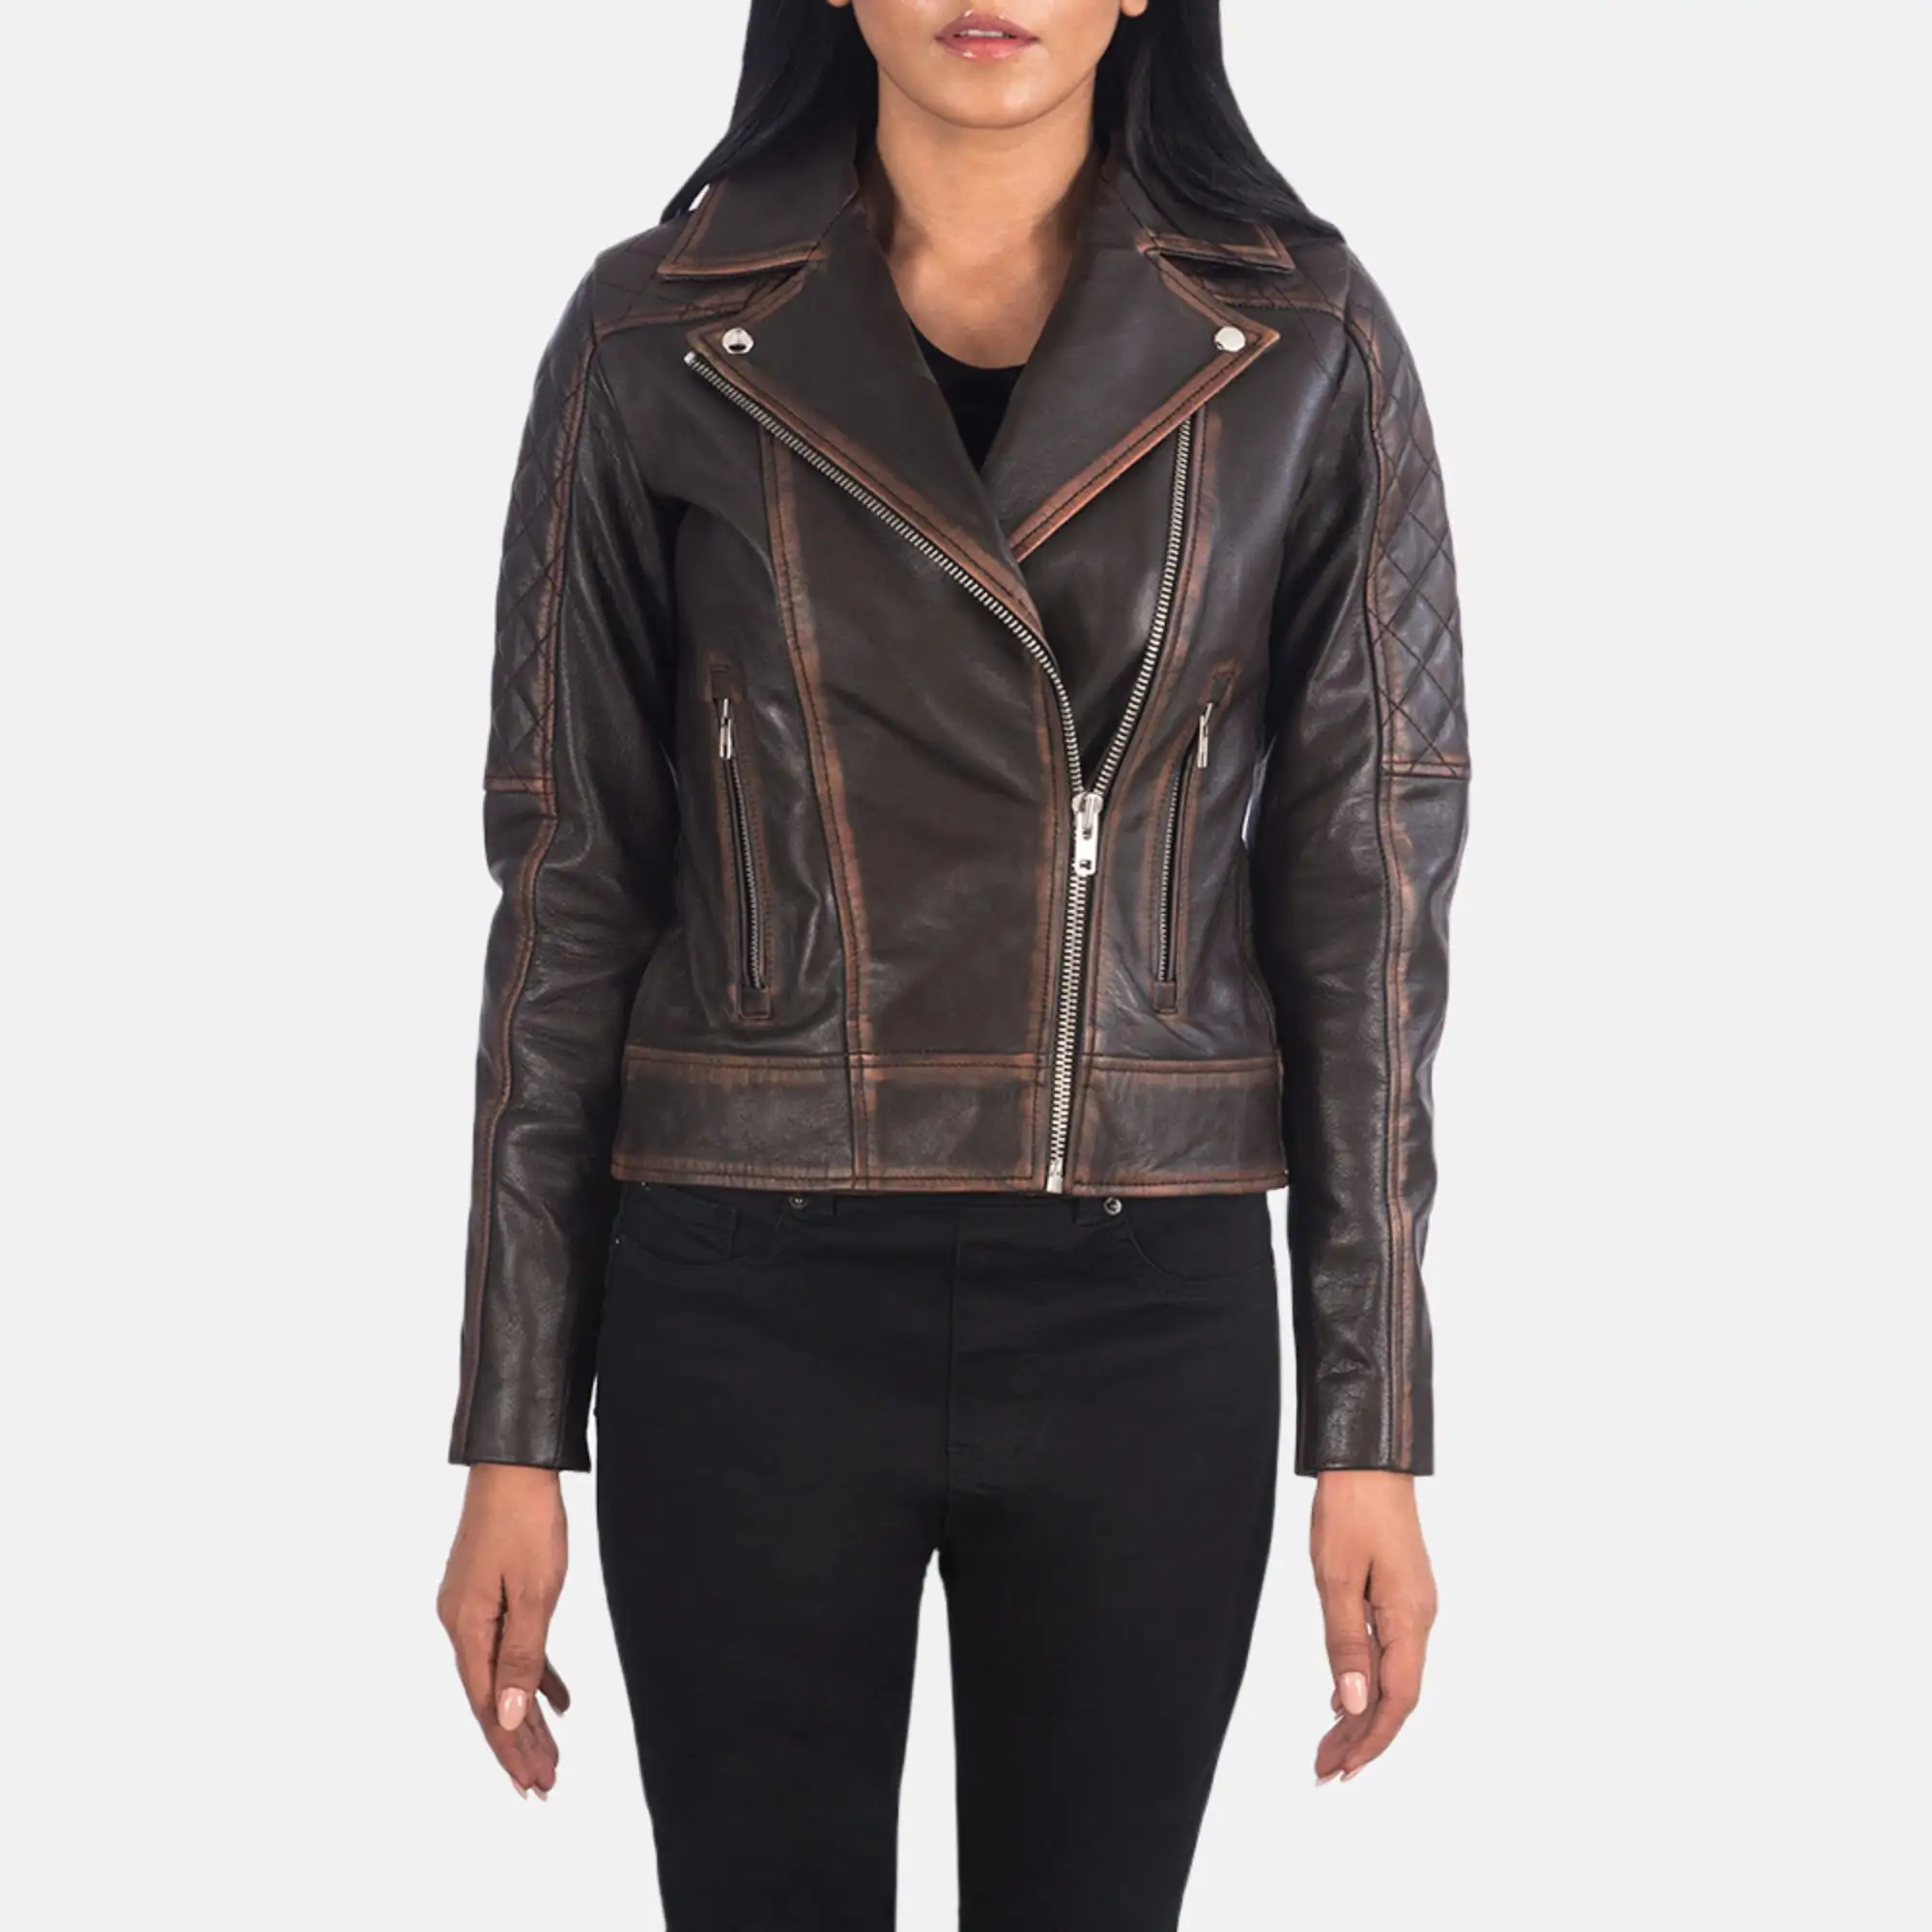 Real Leather Sheepskin Aniline Zipper Cityscape Black Women Biker Jacket with Quilted Viscose Lining and Inside Outside Pockets